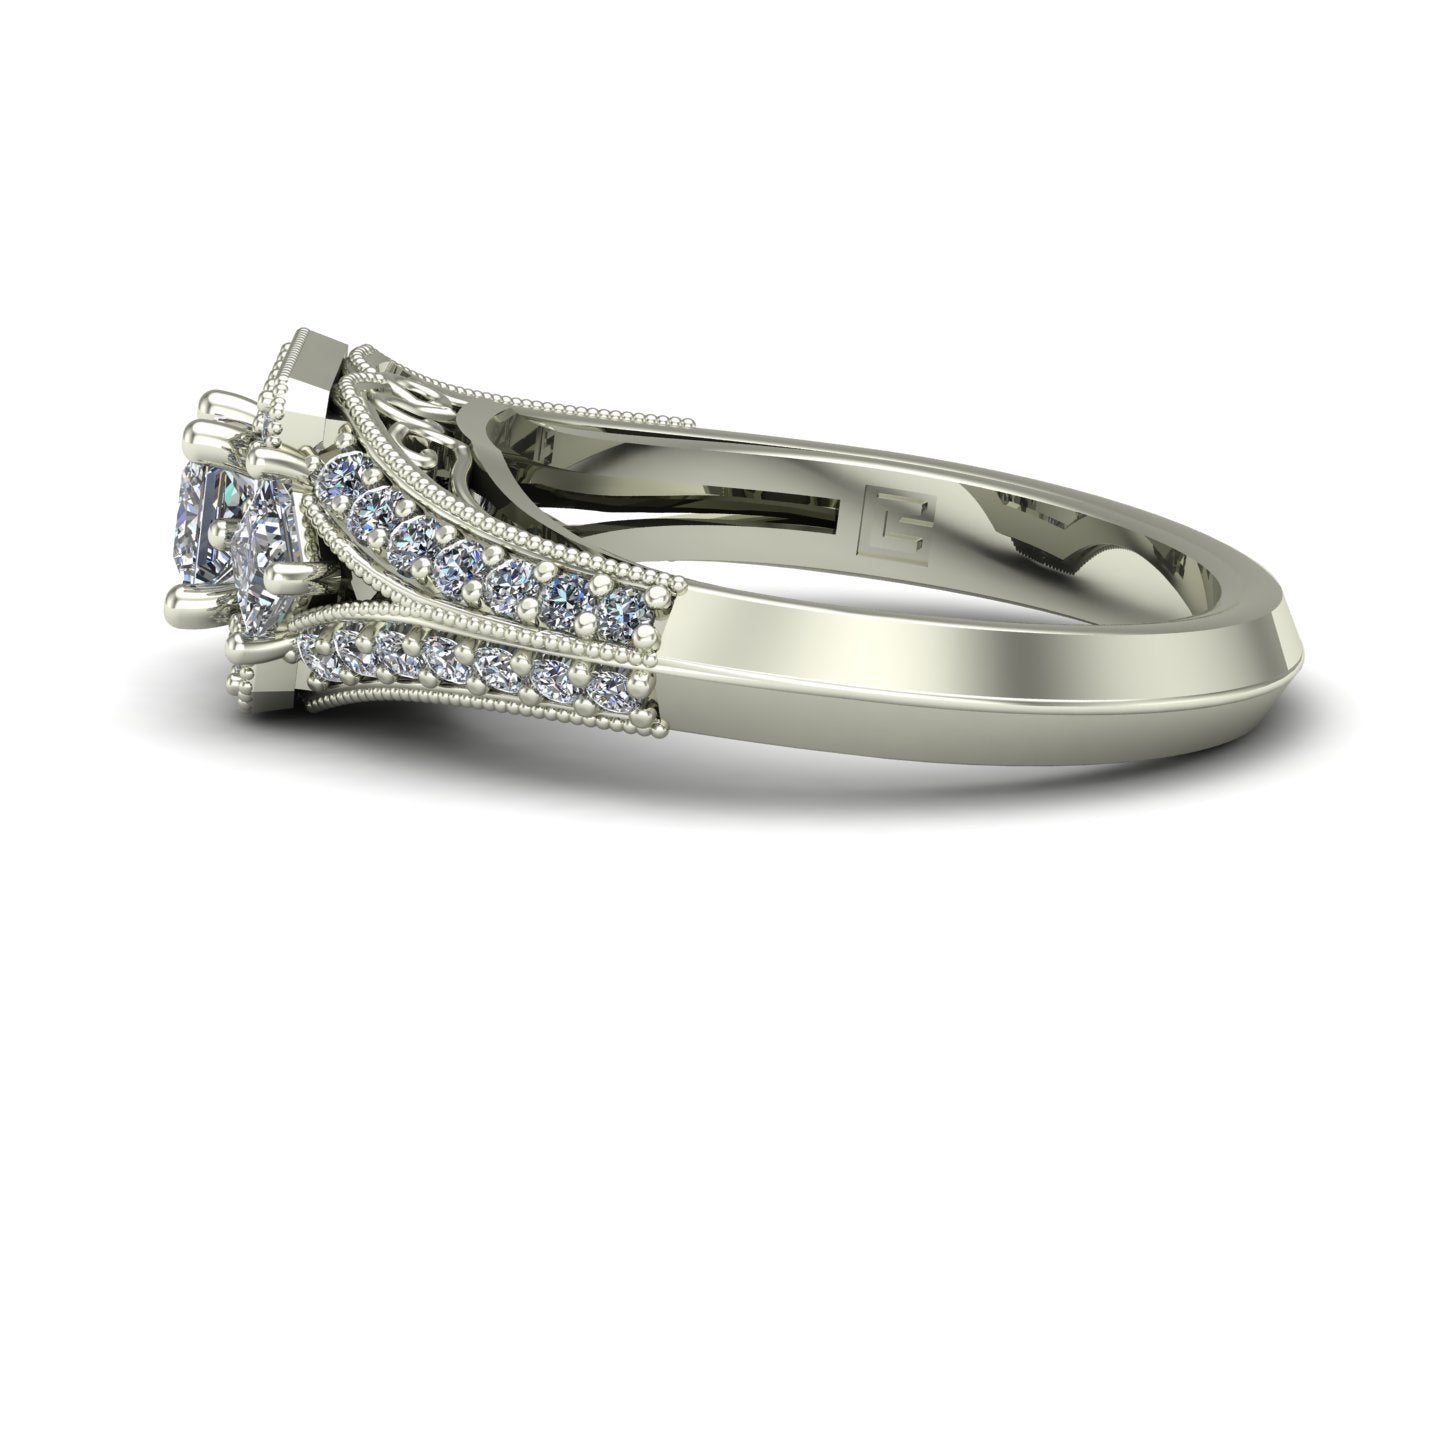 princess cut diamond three stone engagement ring with split shank in 14k white gold - Charles Babb Designs - side view